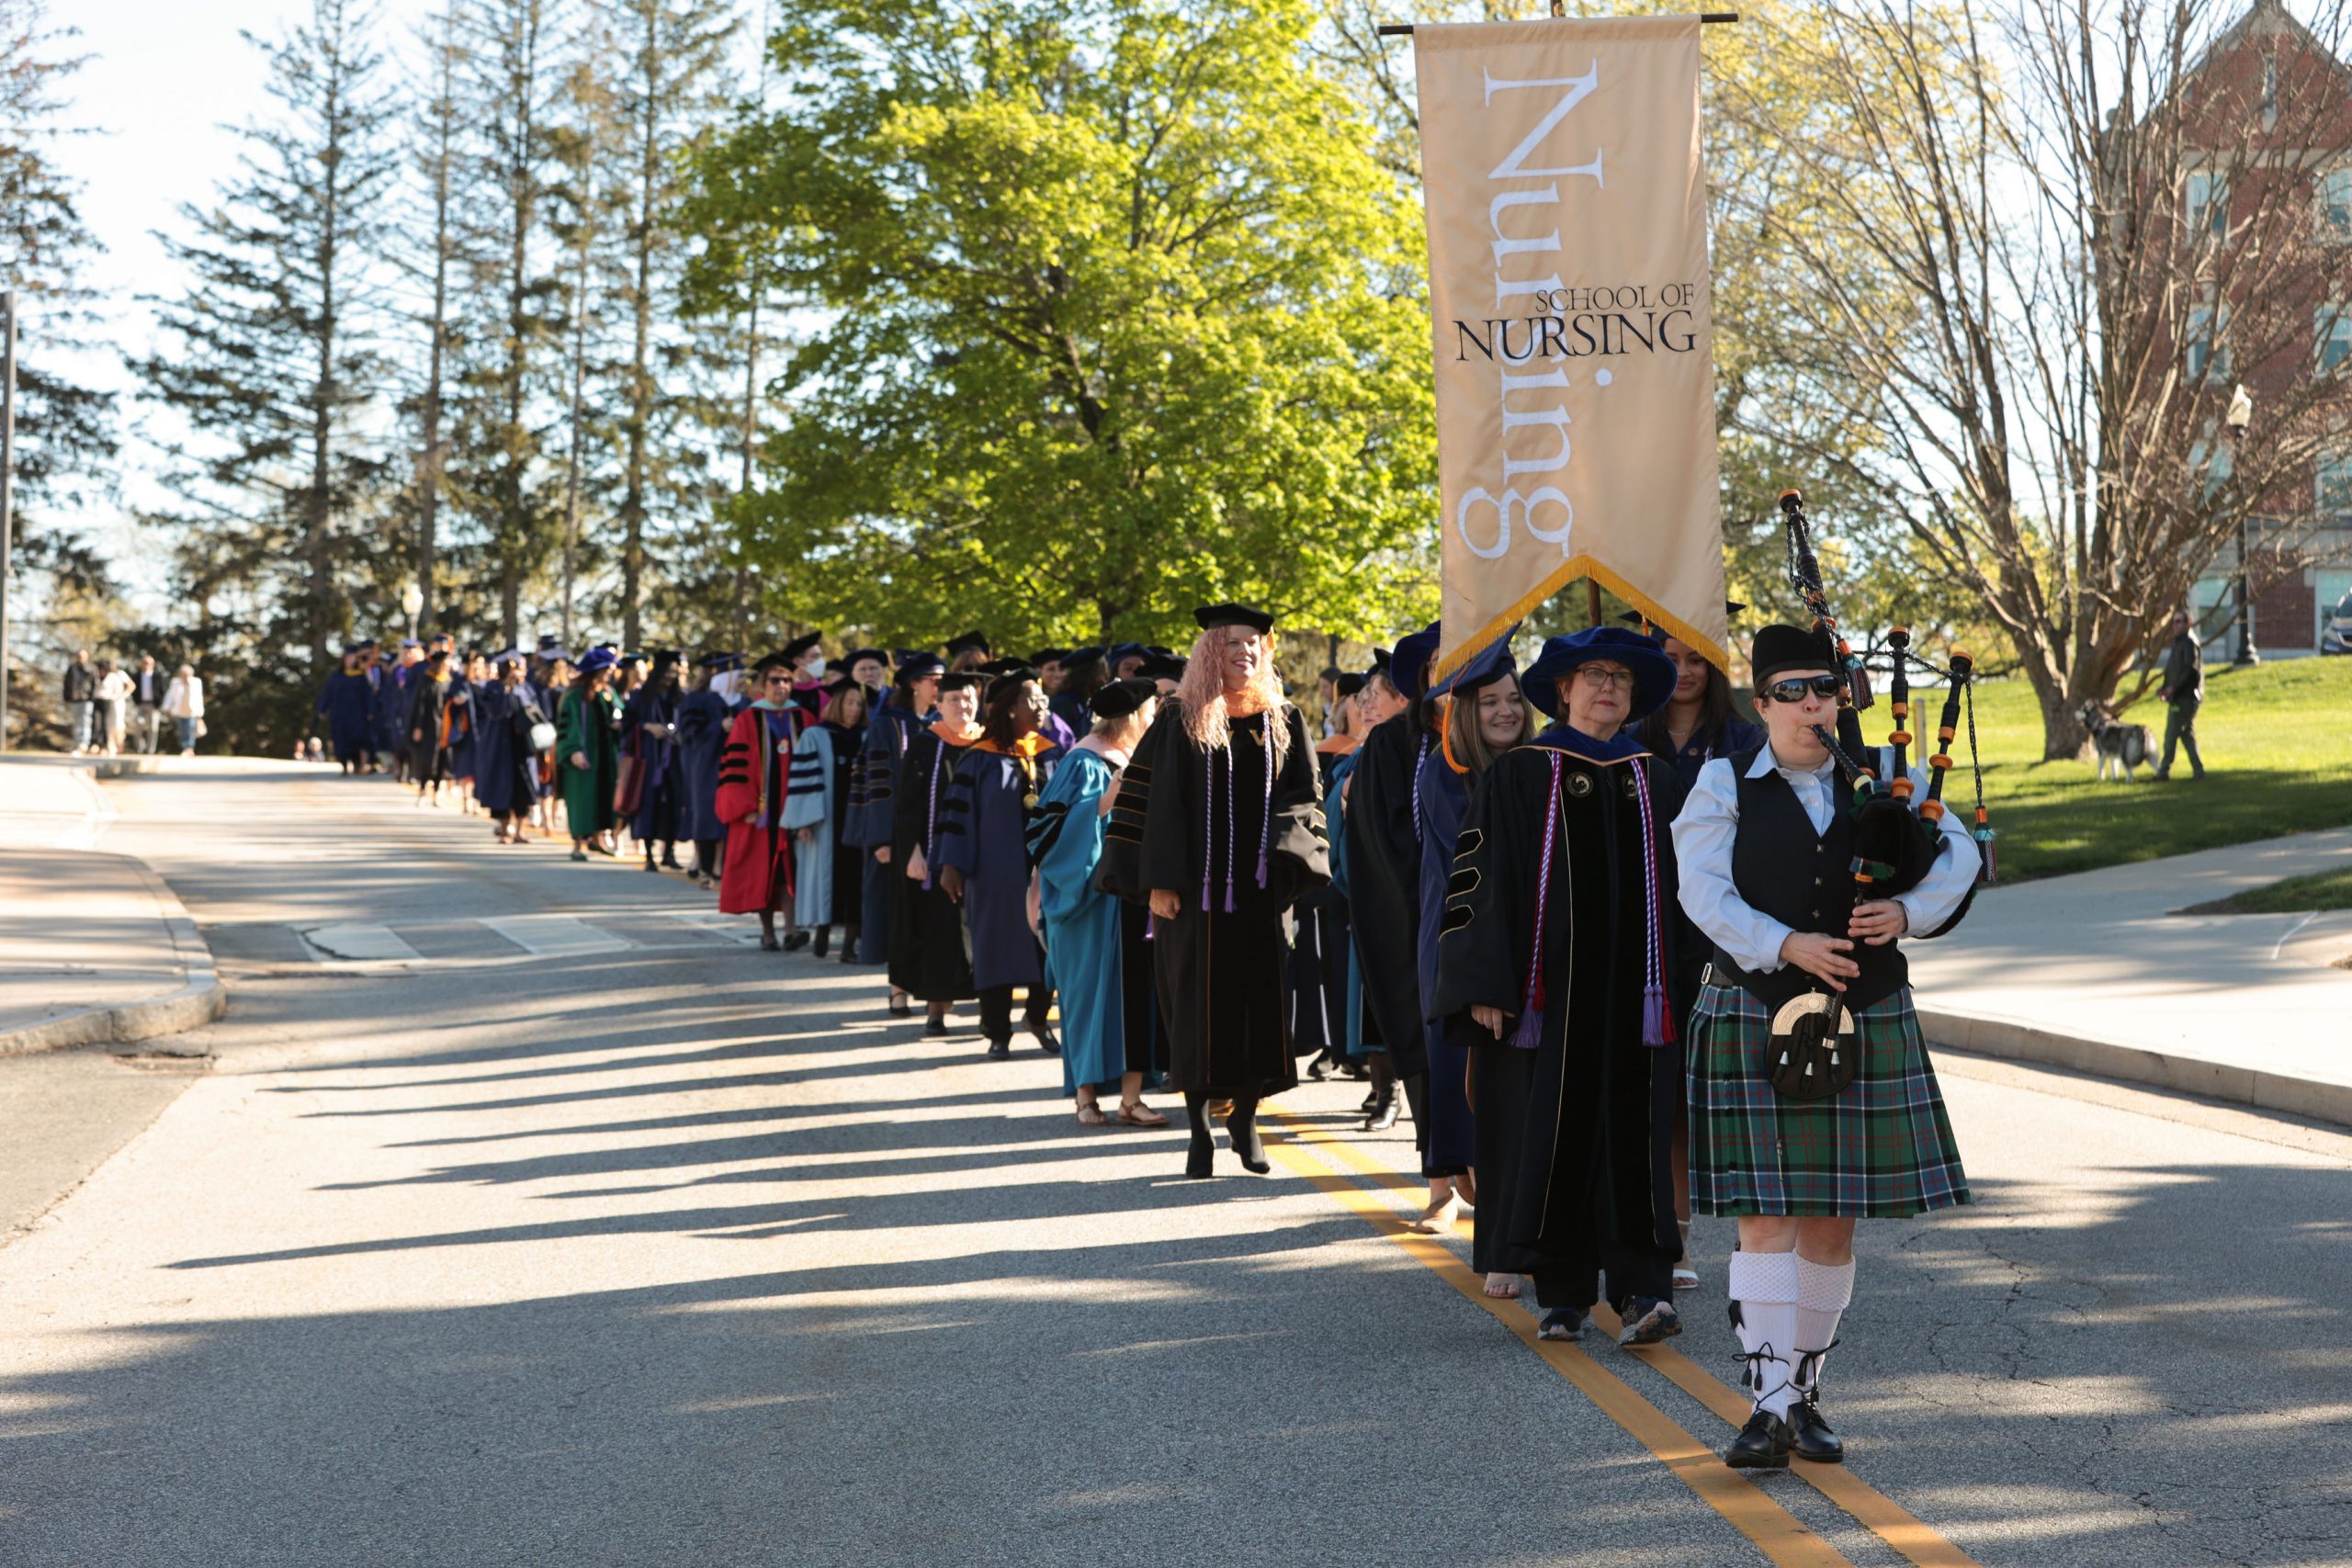 Nursing procession at commencement down road. 